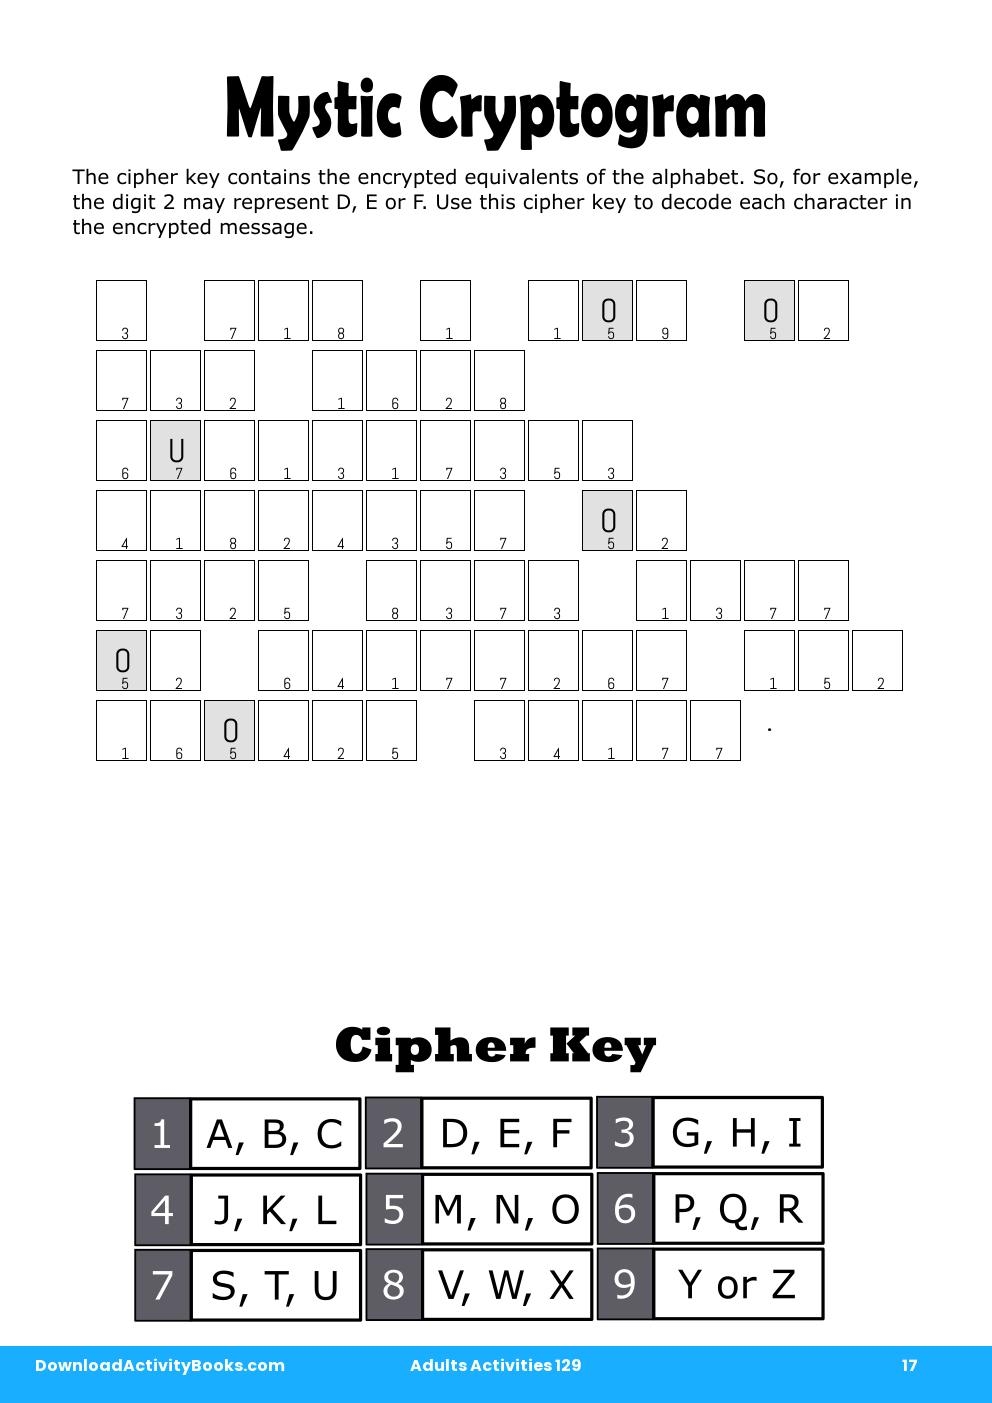 Mystic Cryptogram in Adults Activities 129